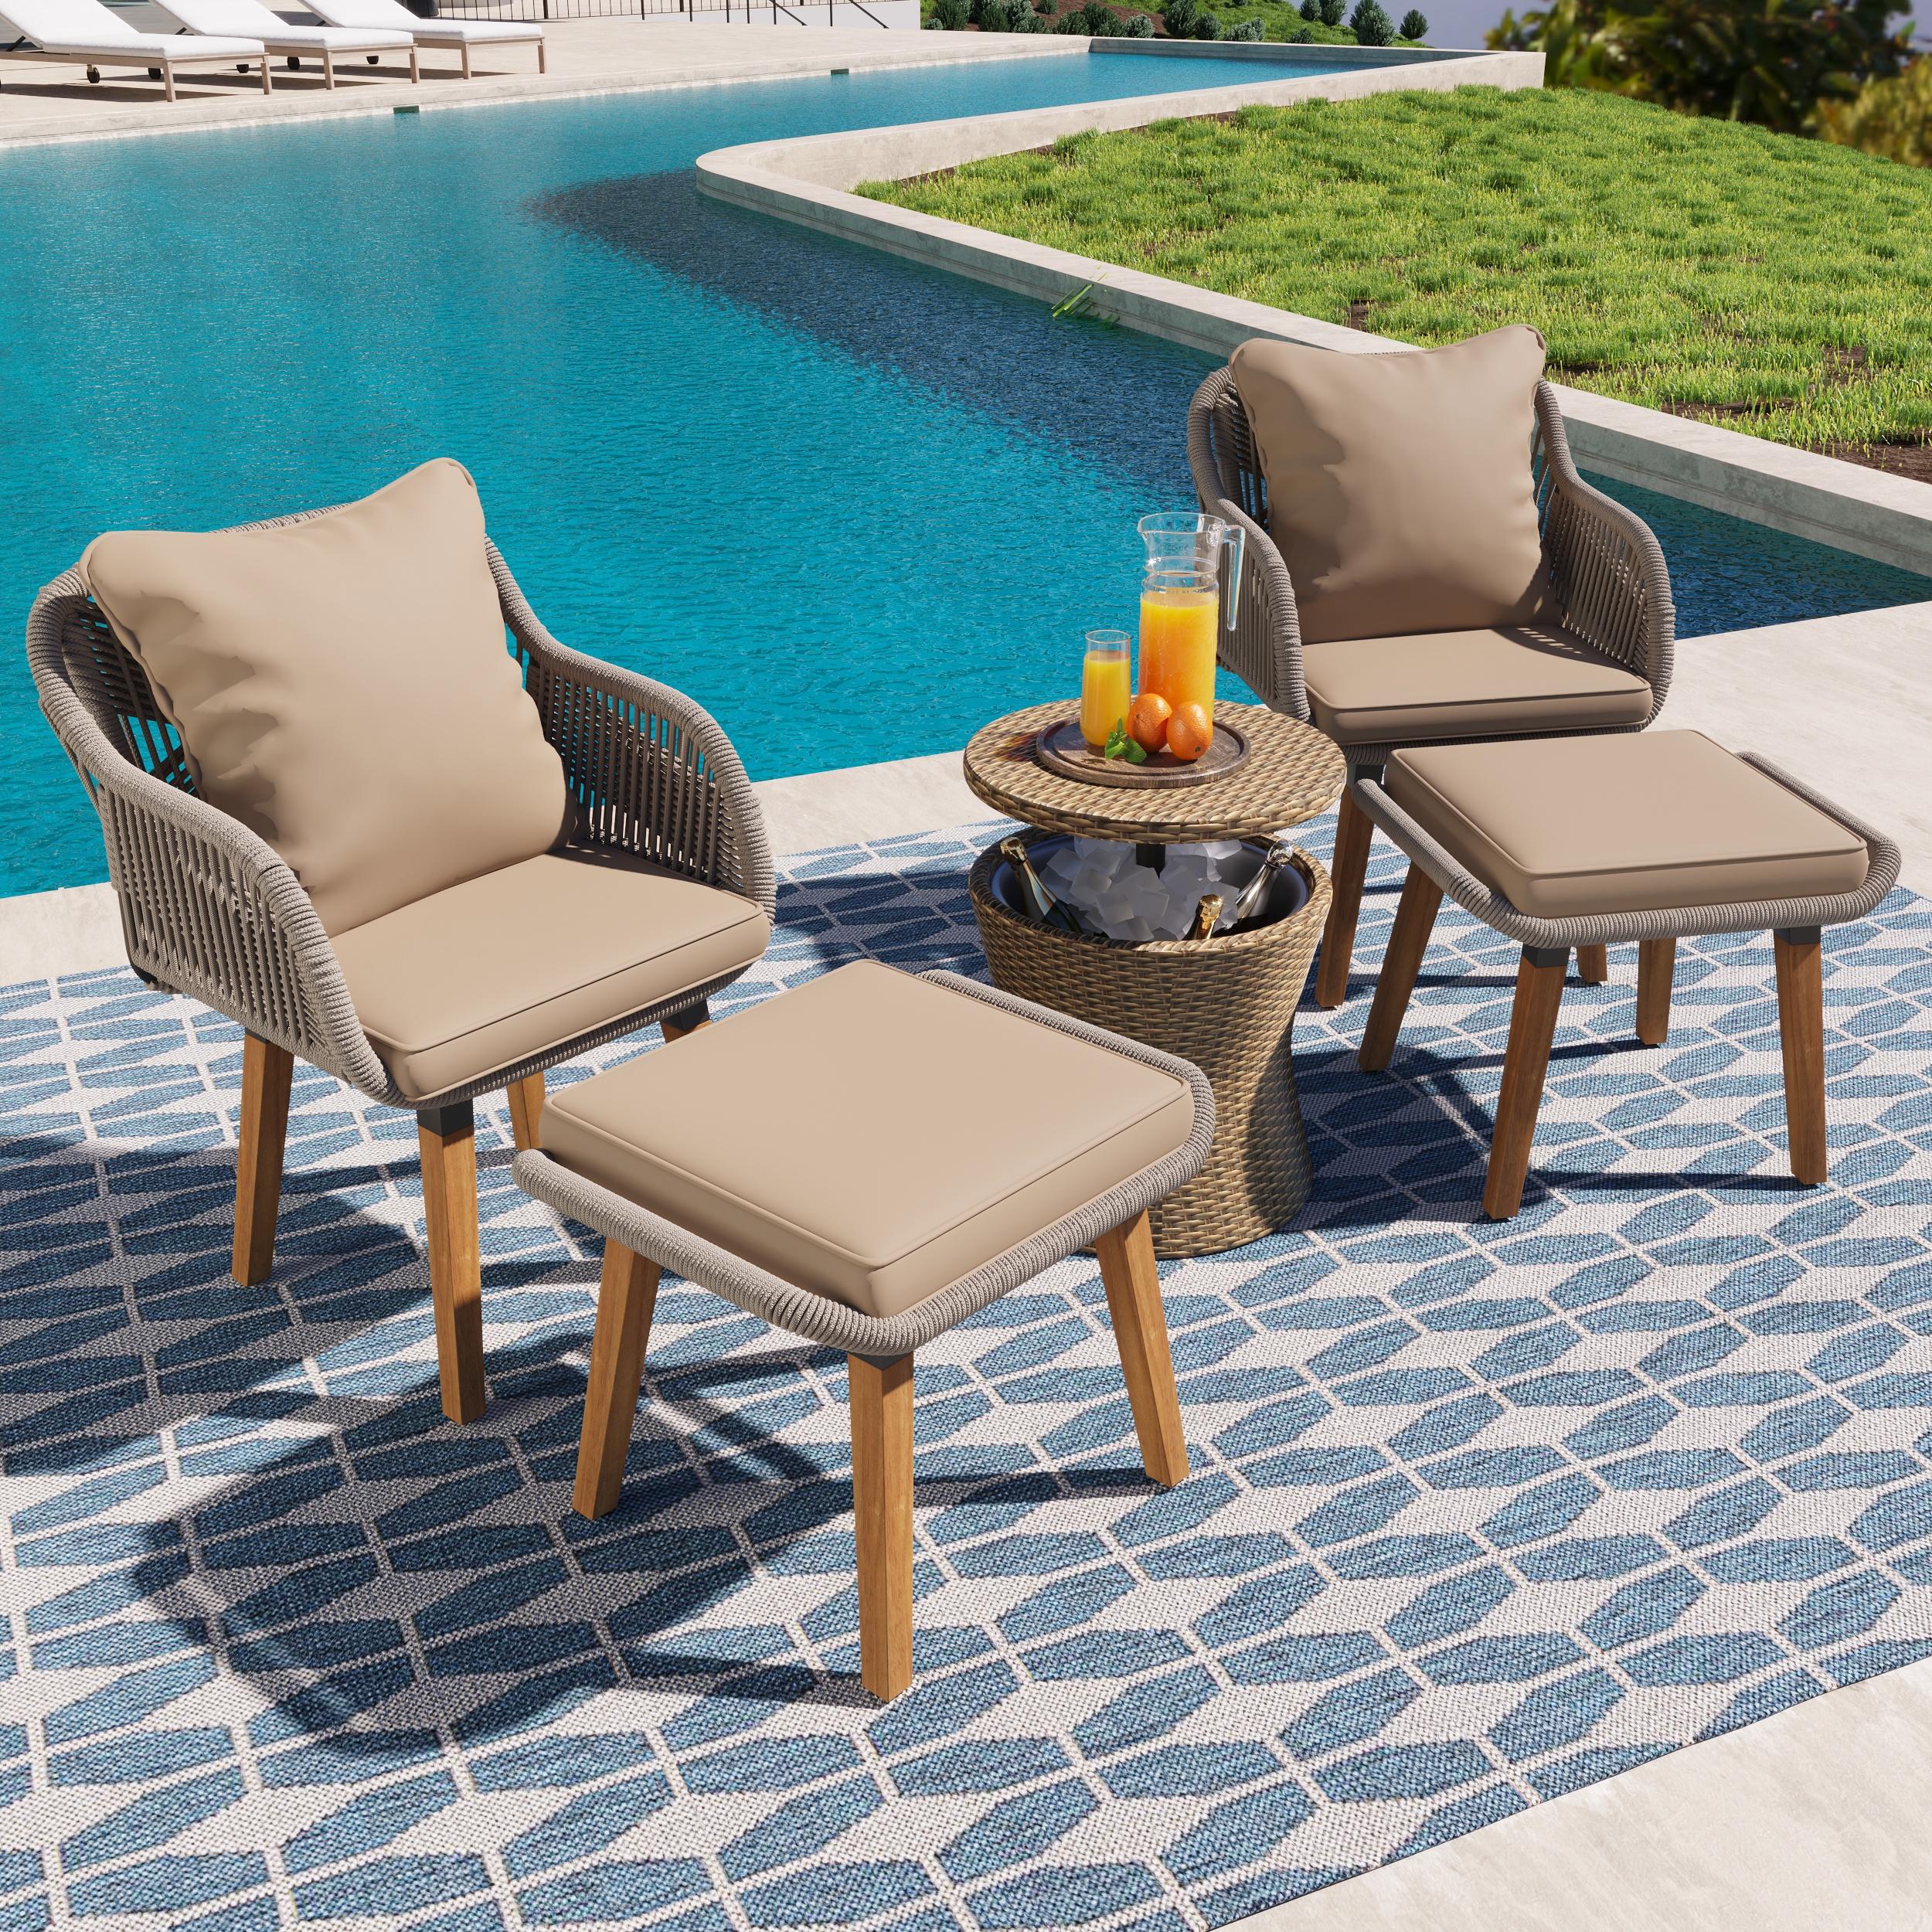 5 Pieces Wicker Patio Furniture Set, Rattan Patio Chair Set with Ottoman and Coffee Table, Outdoor Furniture Set with Blue Seat Cushion for Garden, Backyard, Porch, Balcony, Poolside, GE032 - image 1 of 11